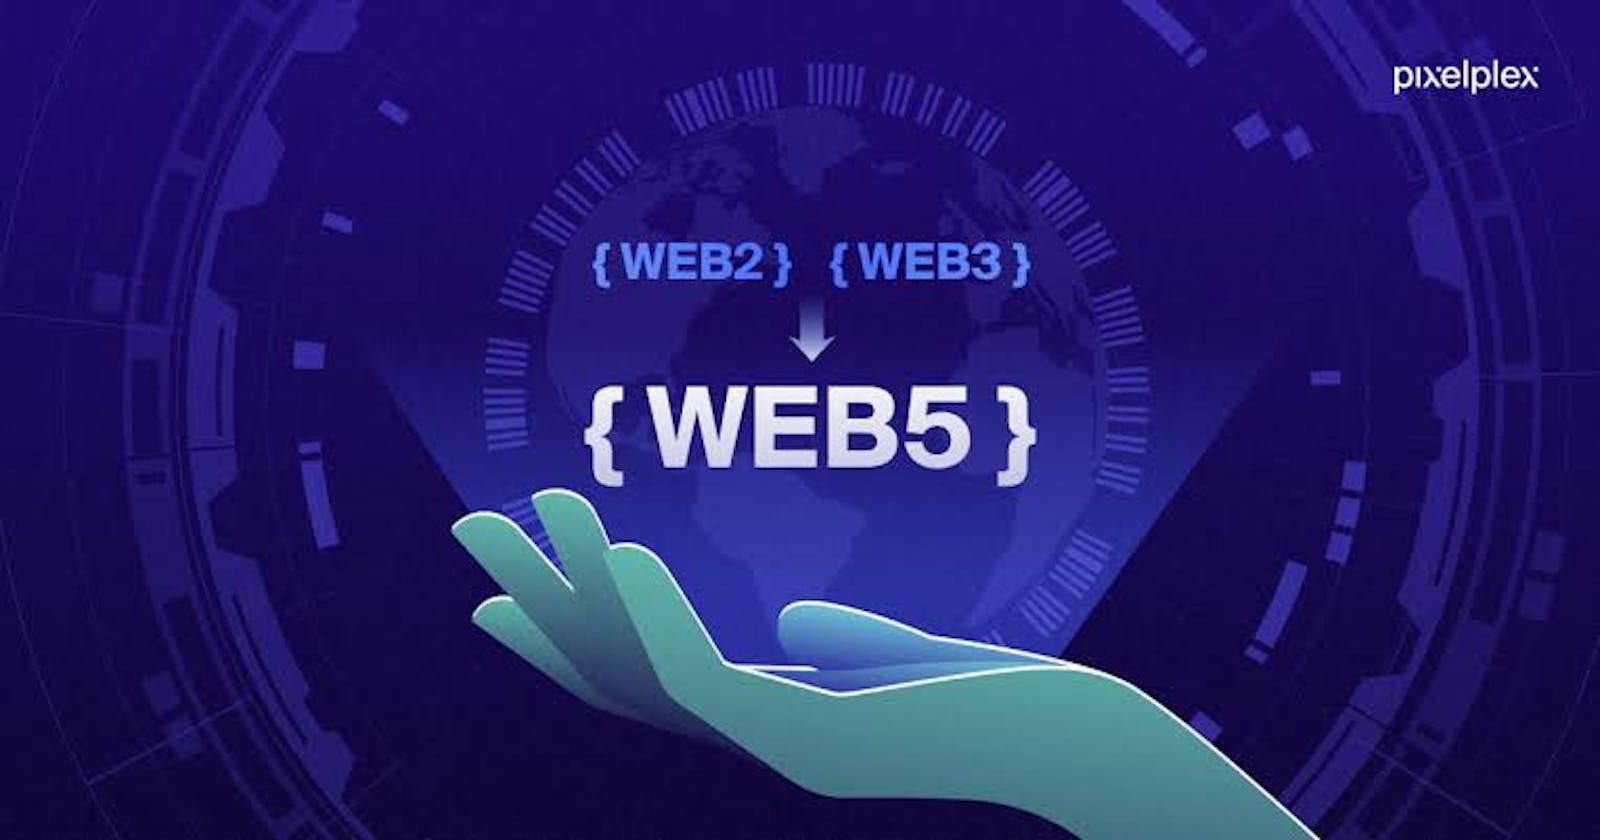 WEB-5, what is it and why should we care